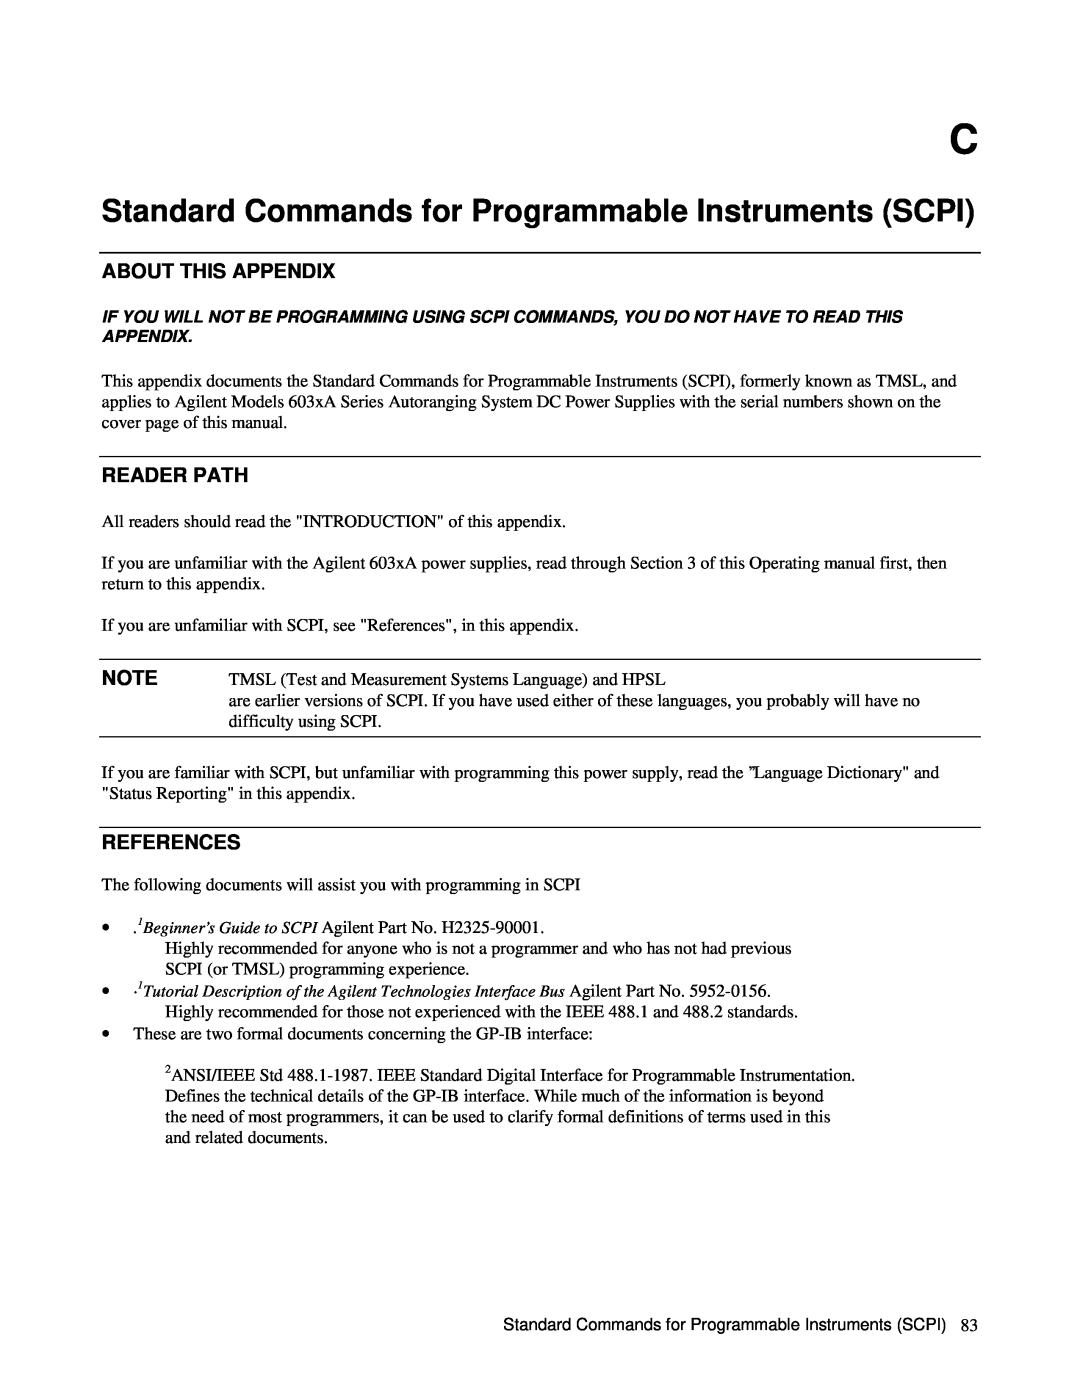 Agilent Technologies Agilent 6031A Standard Commands for Programmable Instruments SCPI, About This Appendix, Reader Path 